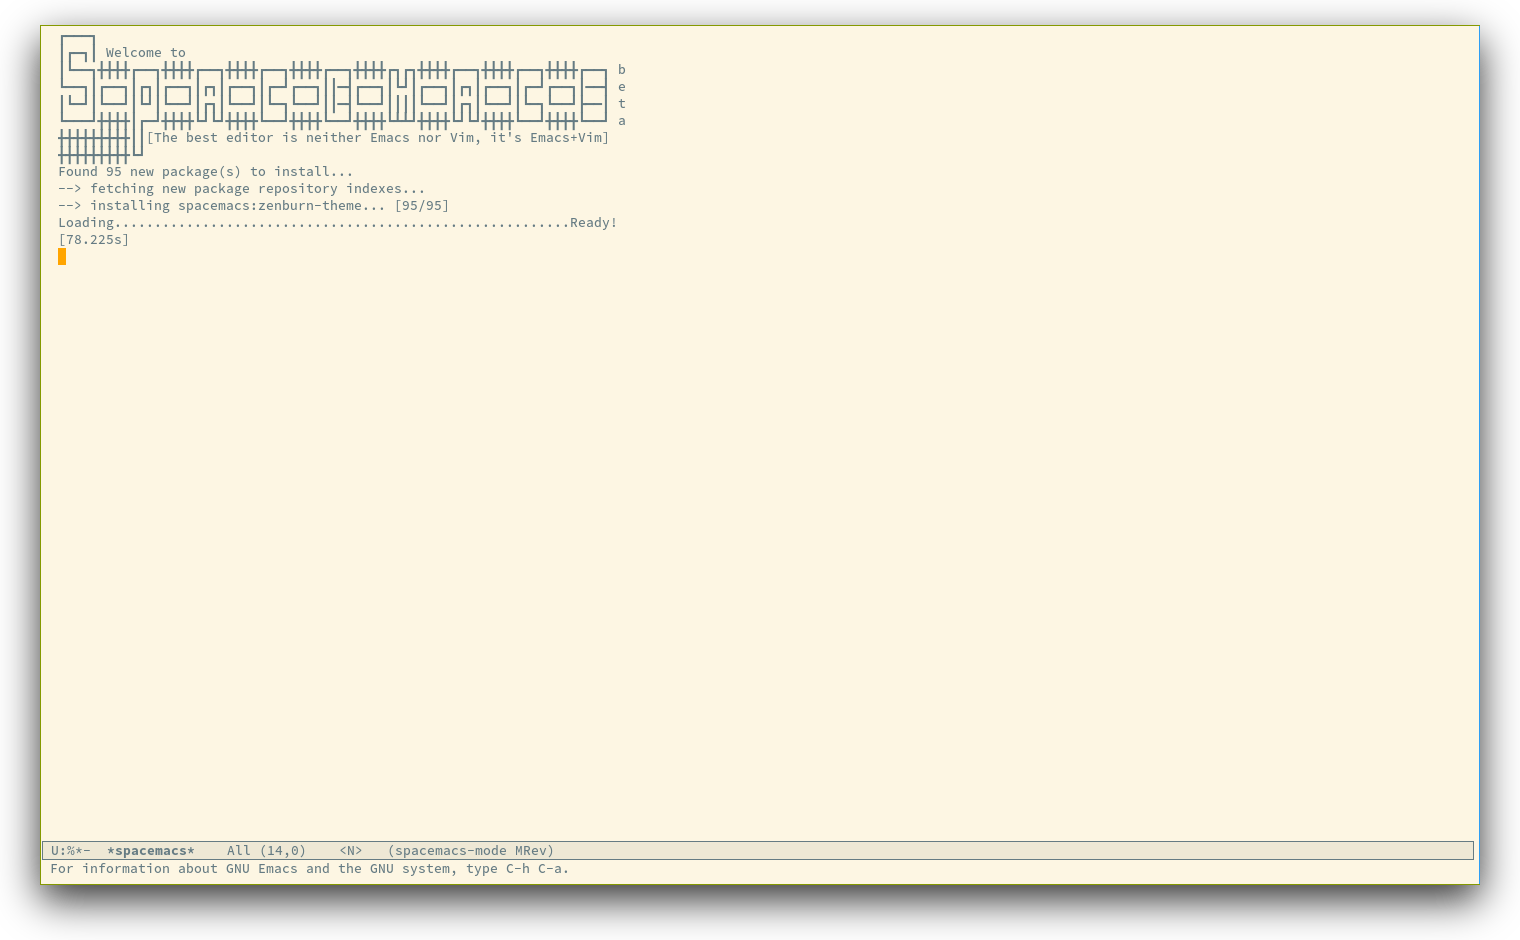 /TakeV/spacemacs/media/commit/f59298b4c4cf20cfaac5443a49c9ce26dab721eb/doc/img/spacemacs-startup.png